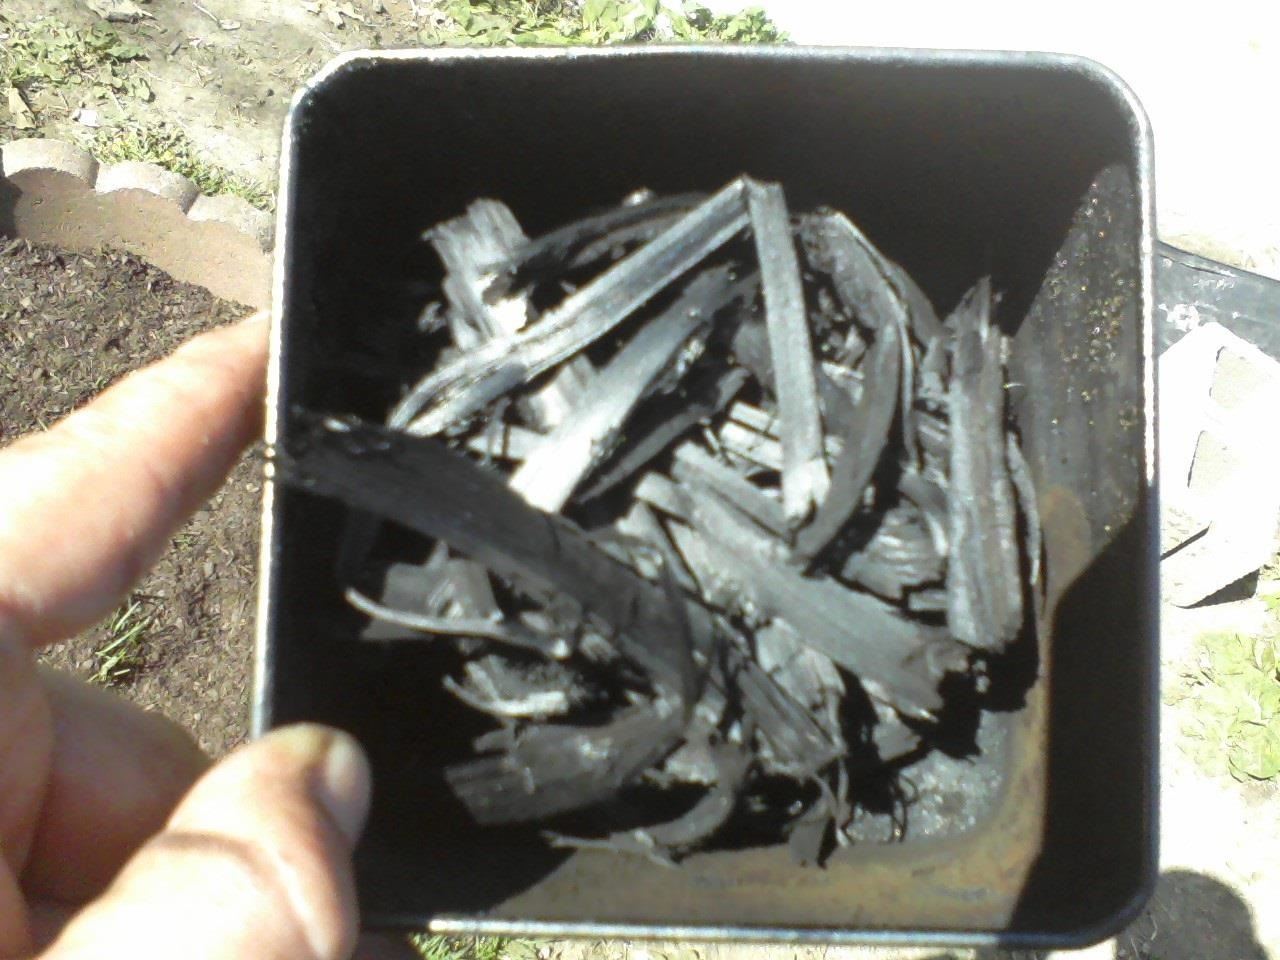 How to Make Your Own Charcoal